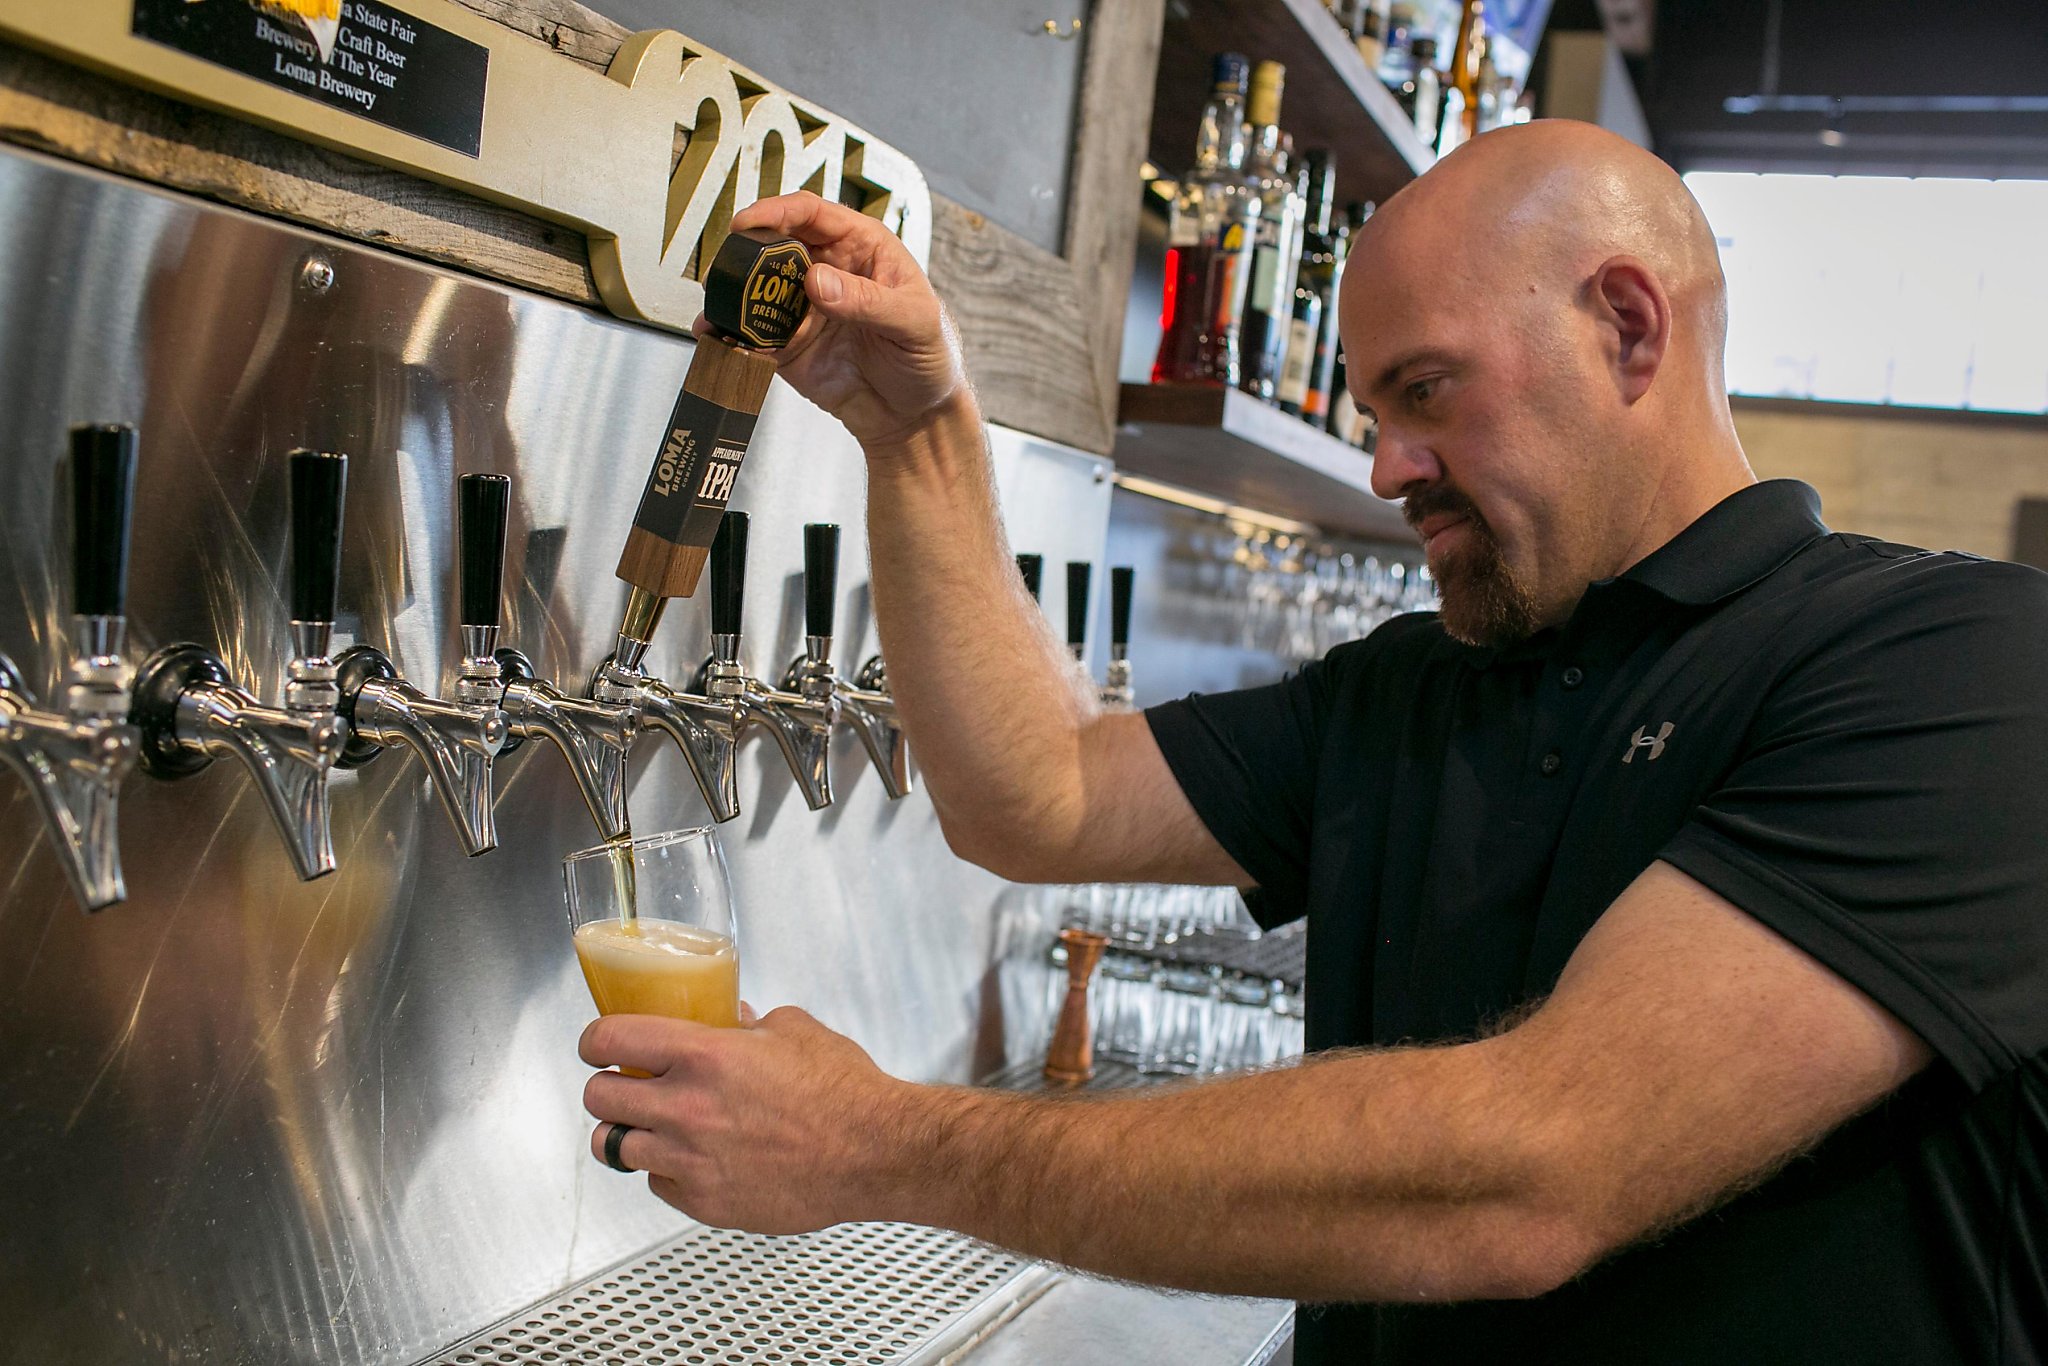 Former baseball player Kevin Youkilis has another hit with beer